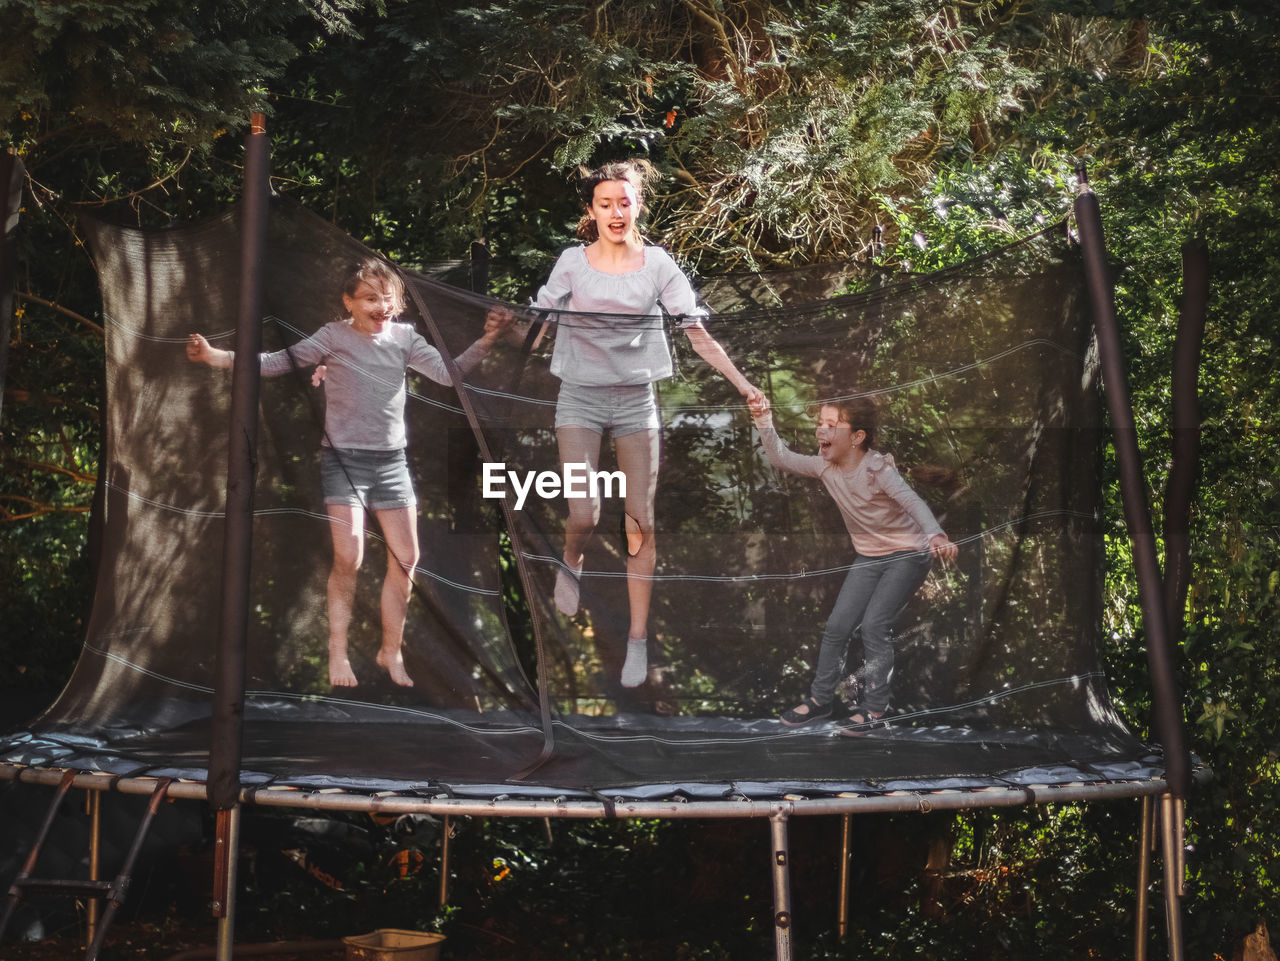 Three beautiful caucasian sister girls in jeans, shorts and a sleeved t-shirt jump on a trampoline